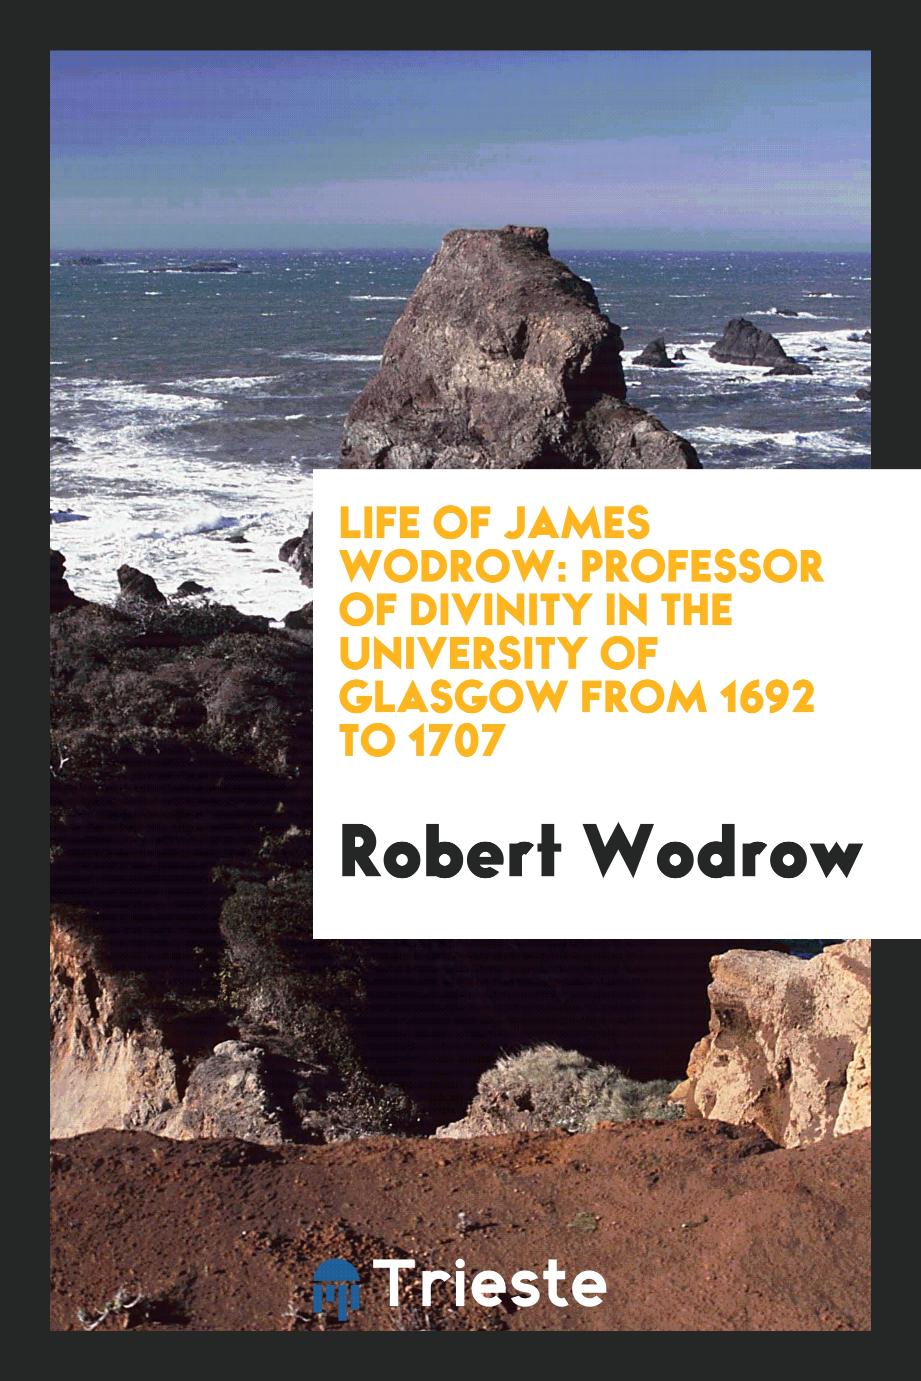 Life of James Wodrow: Professor of Divinity in the University of Glasgow from 1692 to 1707